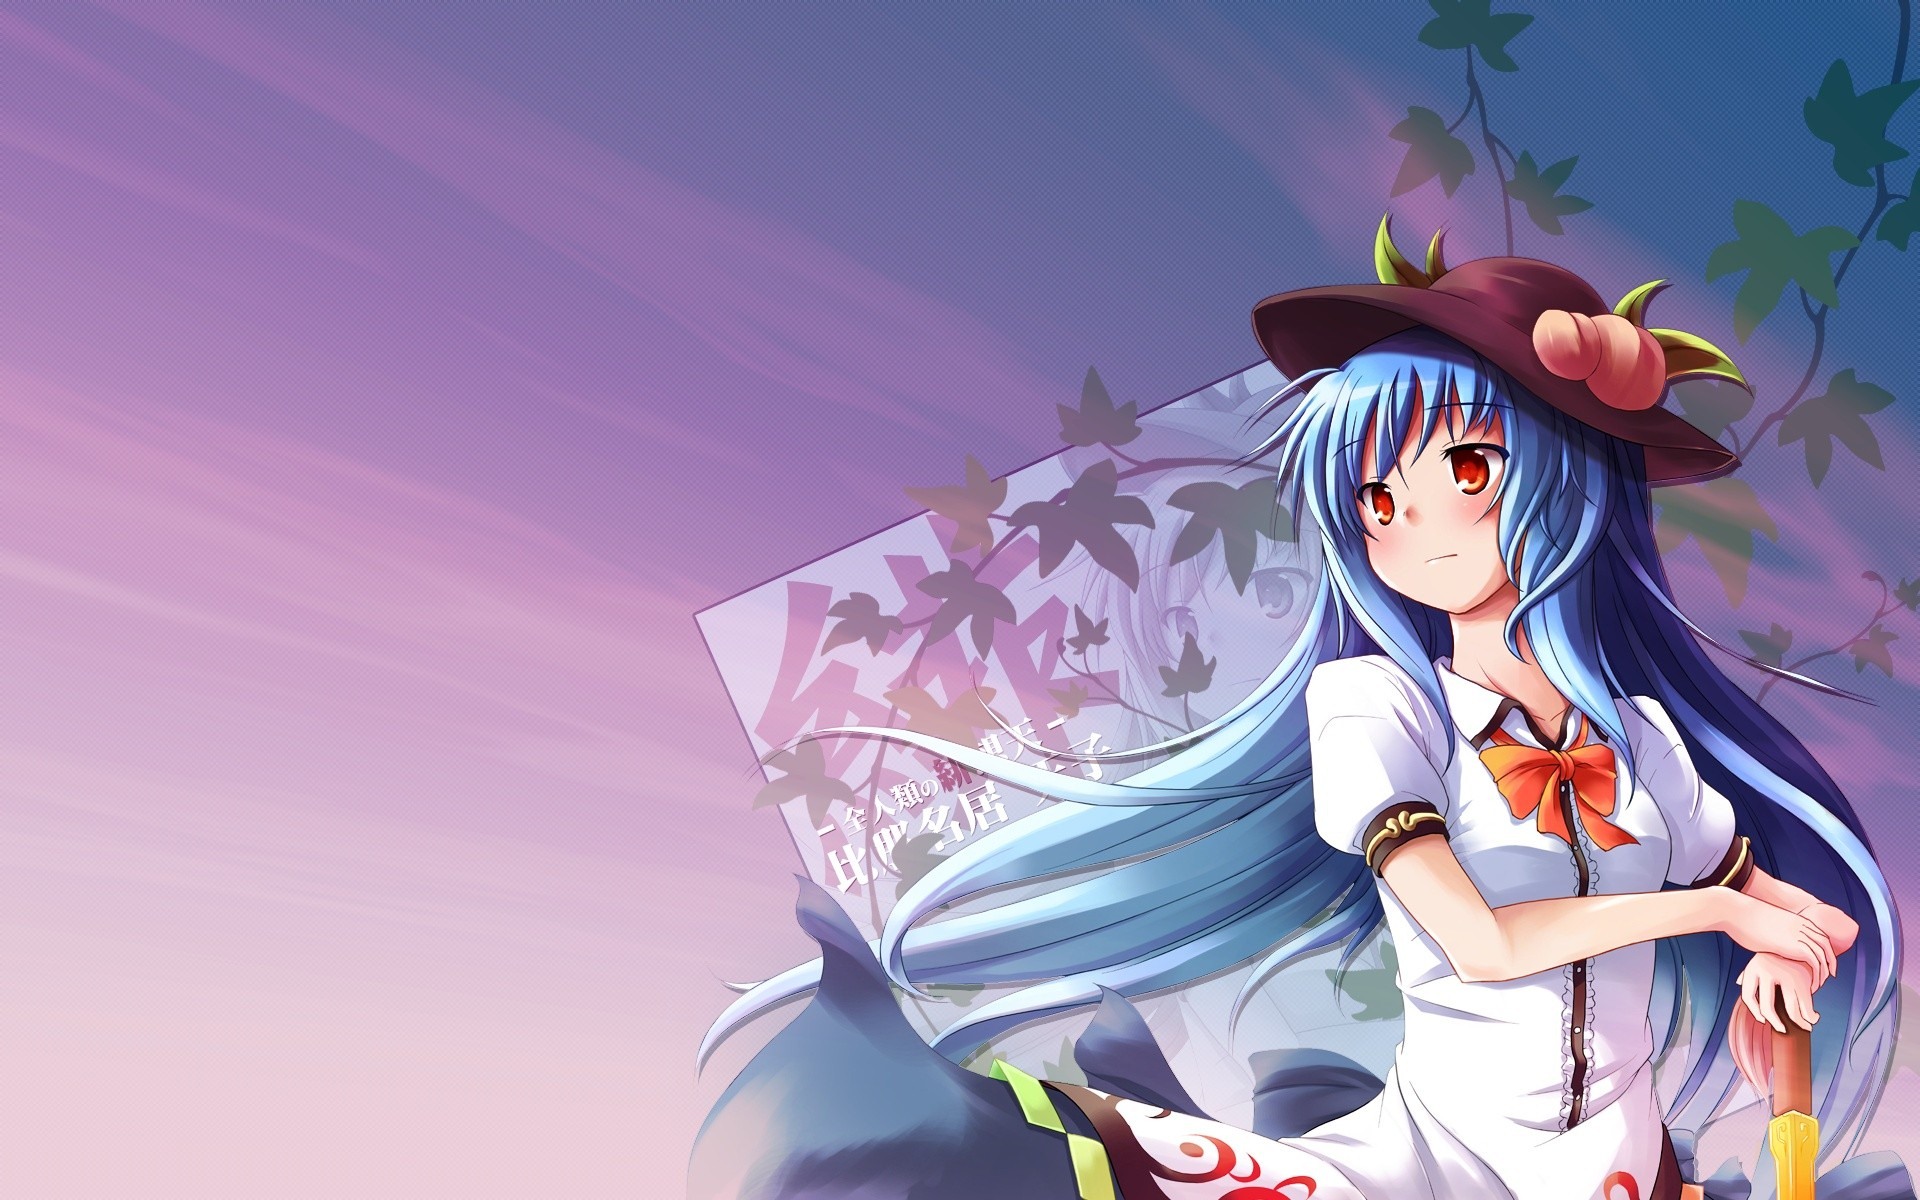 Touhou Project caricature HD wallpapers #16 - 1920x1200